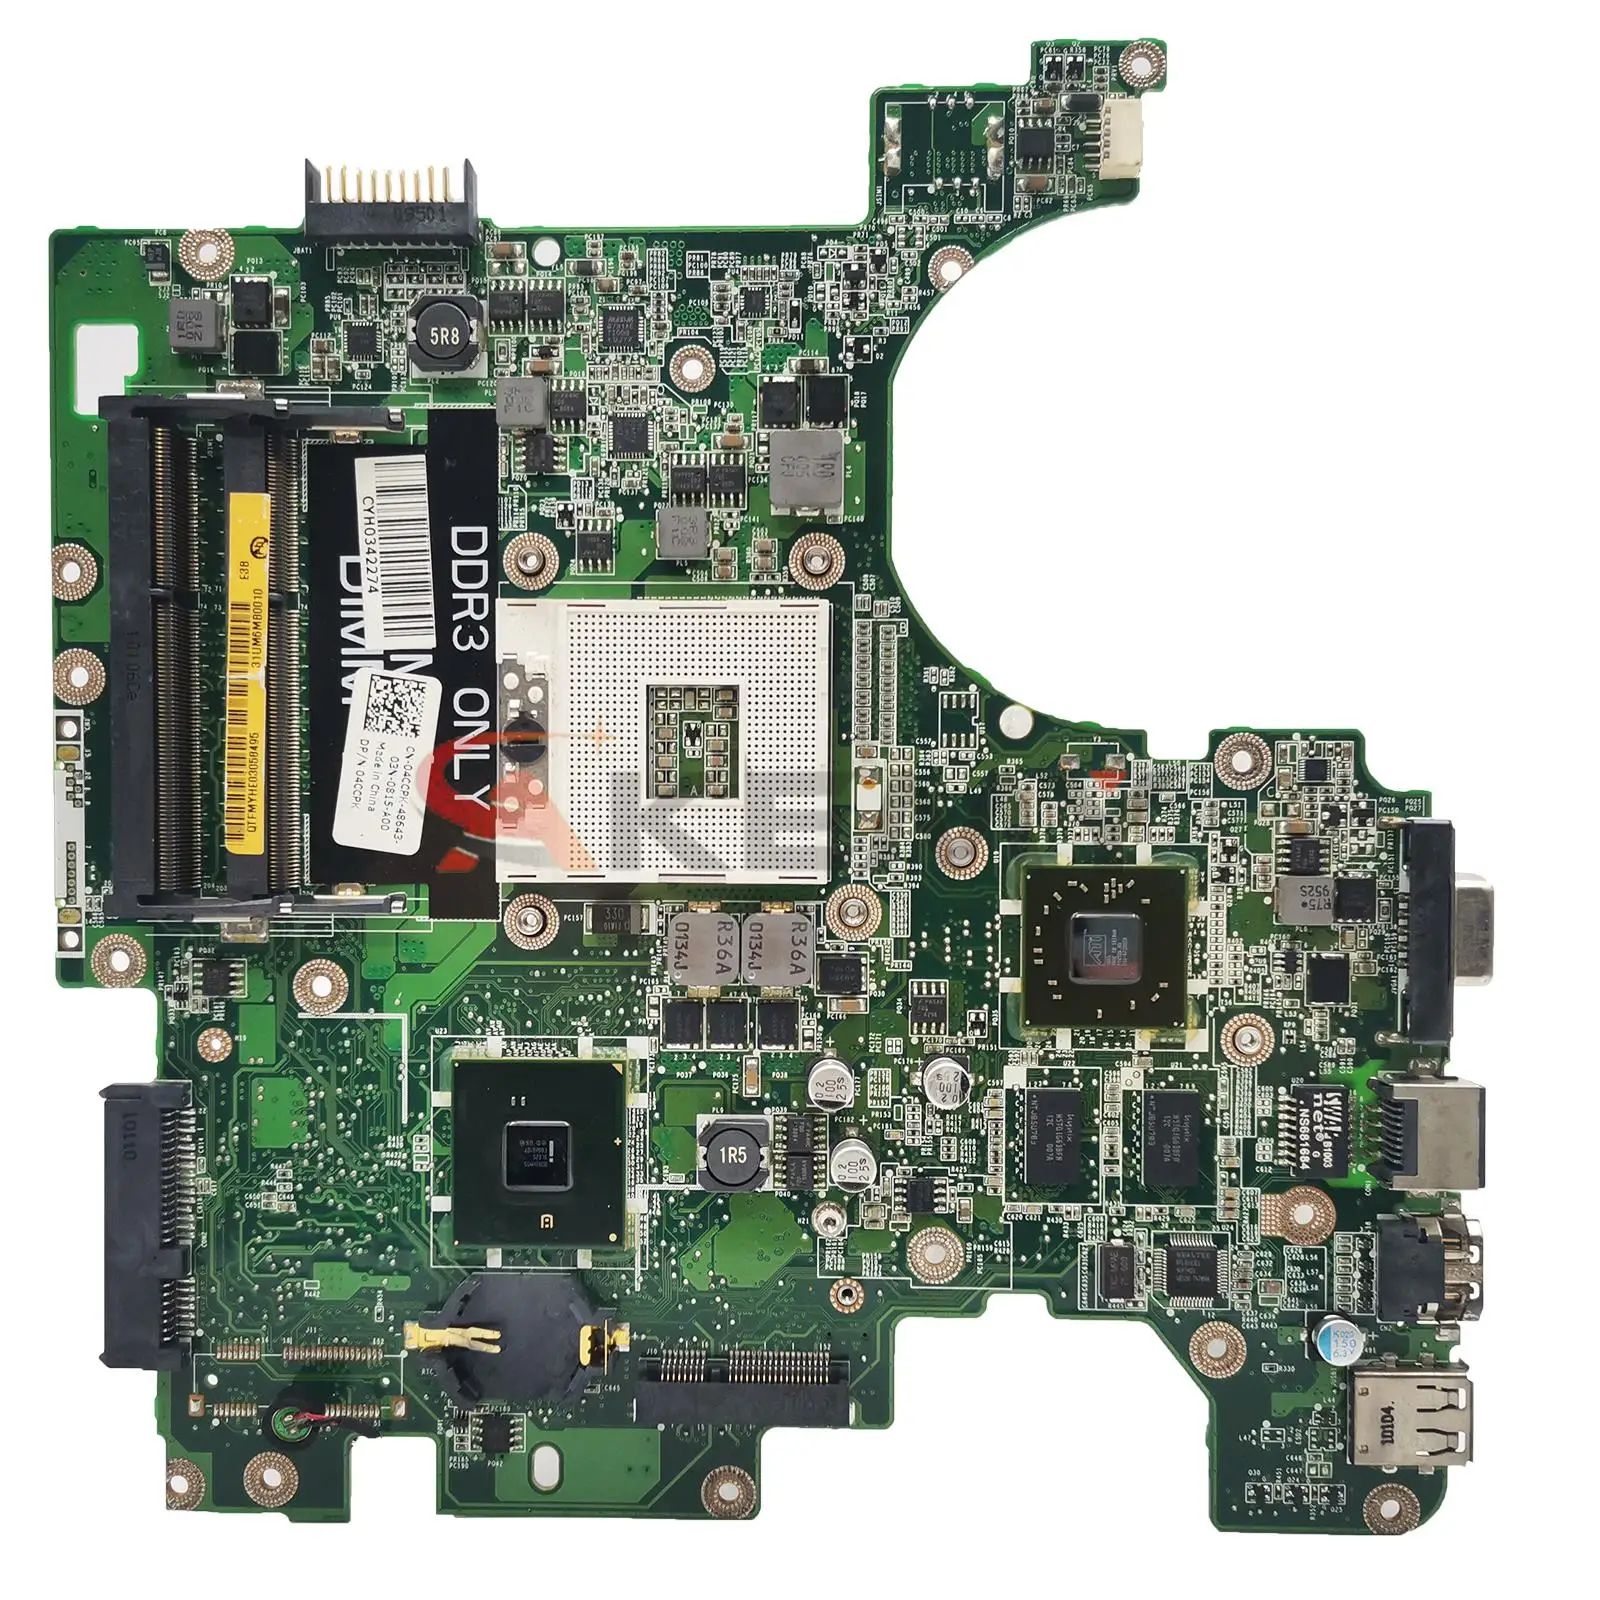 

CN-06T28N 06T28N Laptop motherboard For DELL Inspiron 1564 HD5450 Notebook Mainboard DA0UM3MB8E0 HM55 216-0774009 DDR3